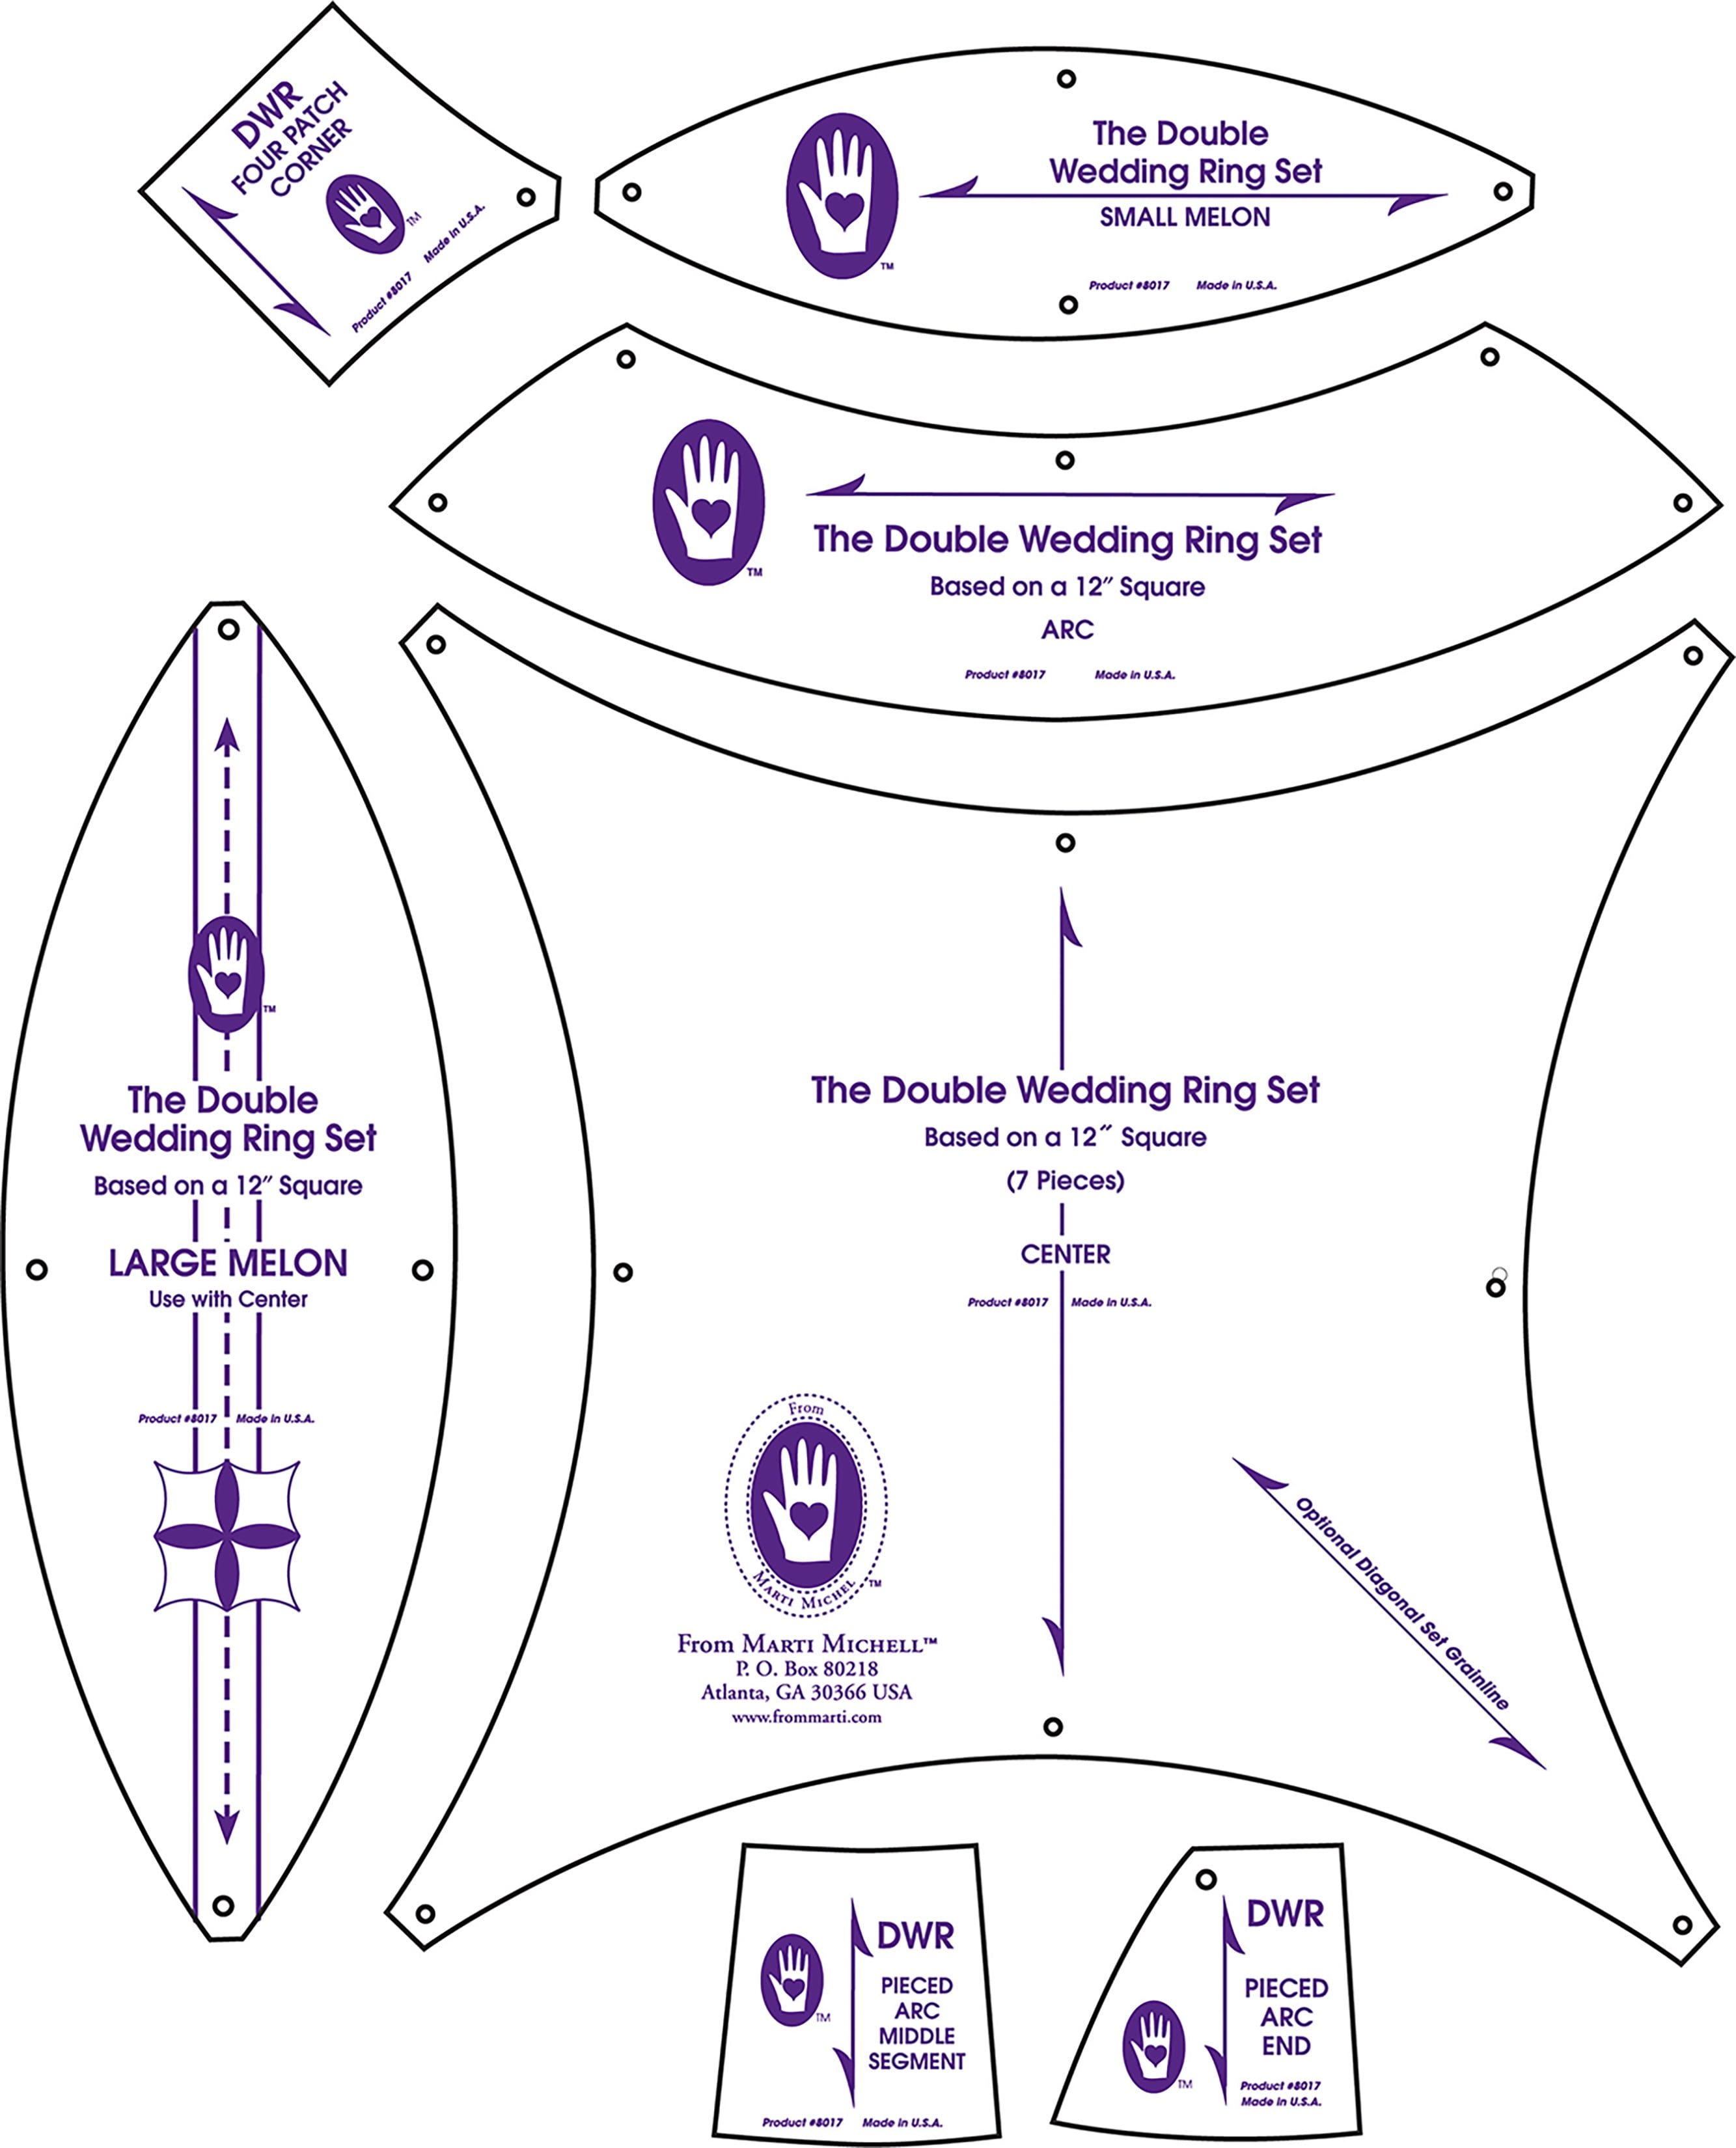 Omnigrid 2257 Double Wedding Ring Rotary Cutting Templates for